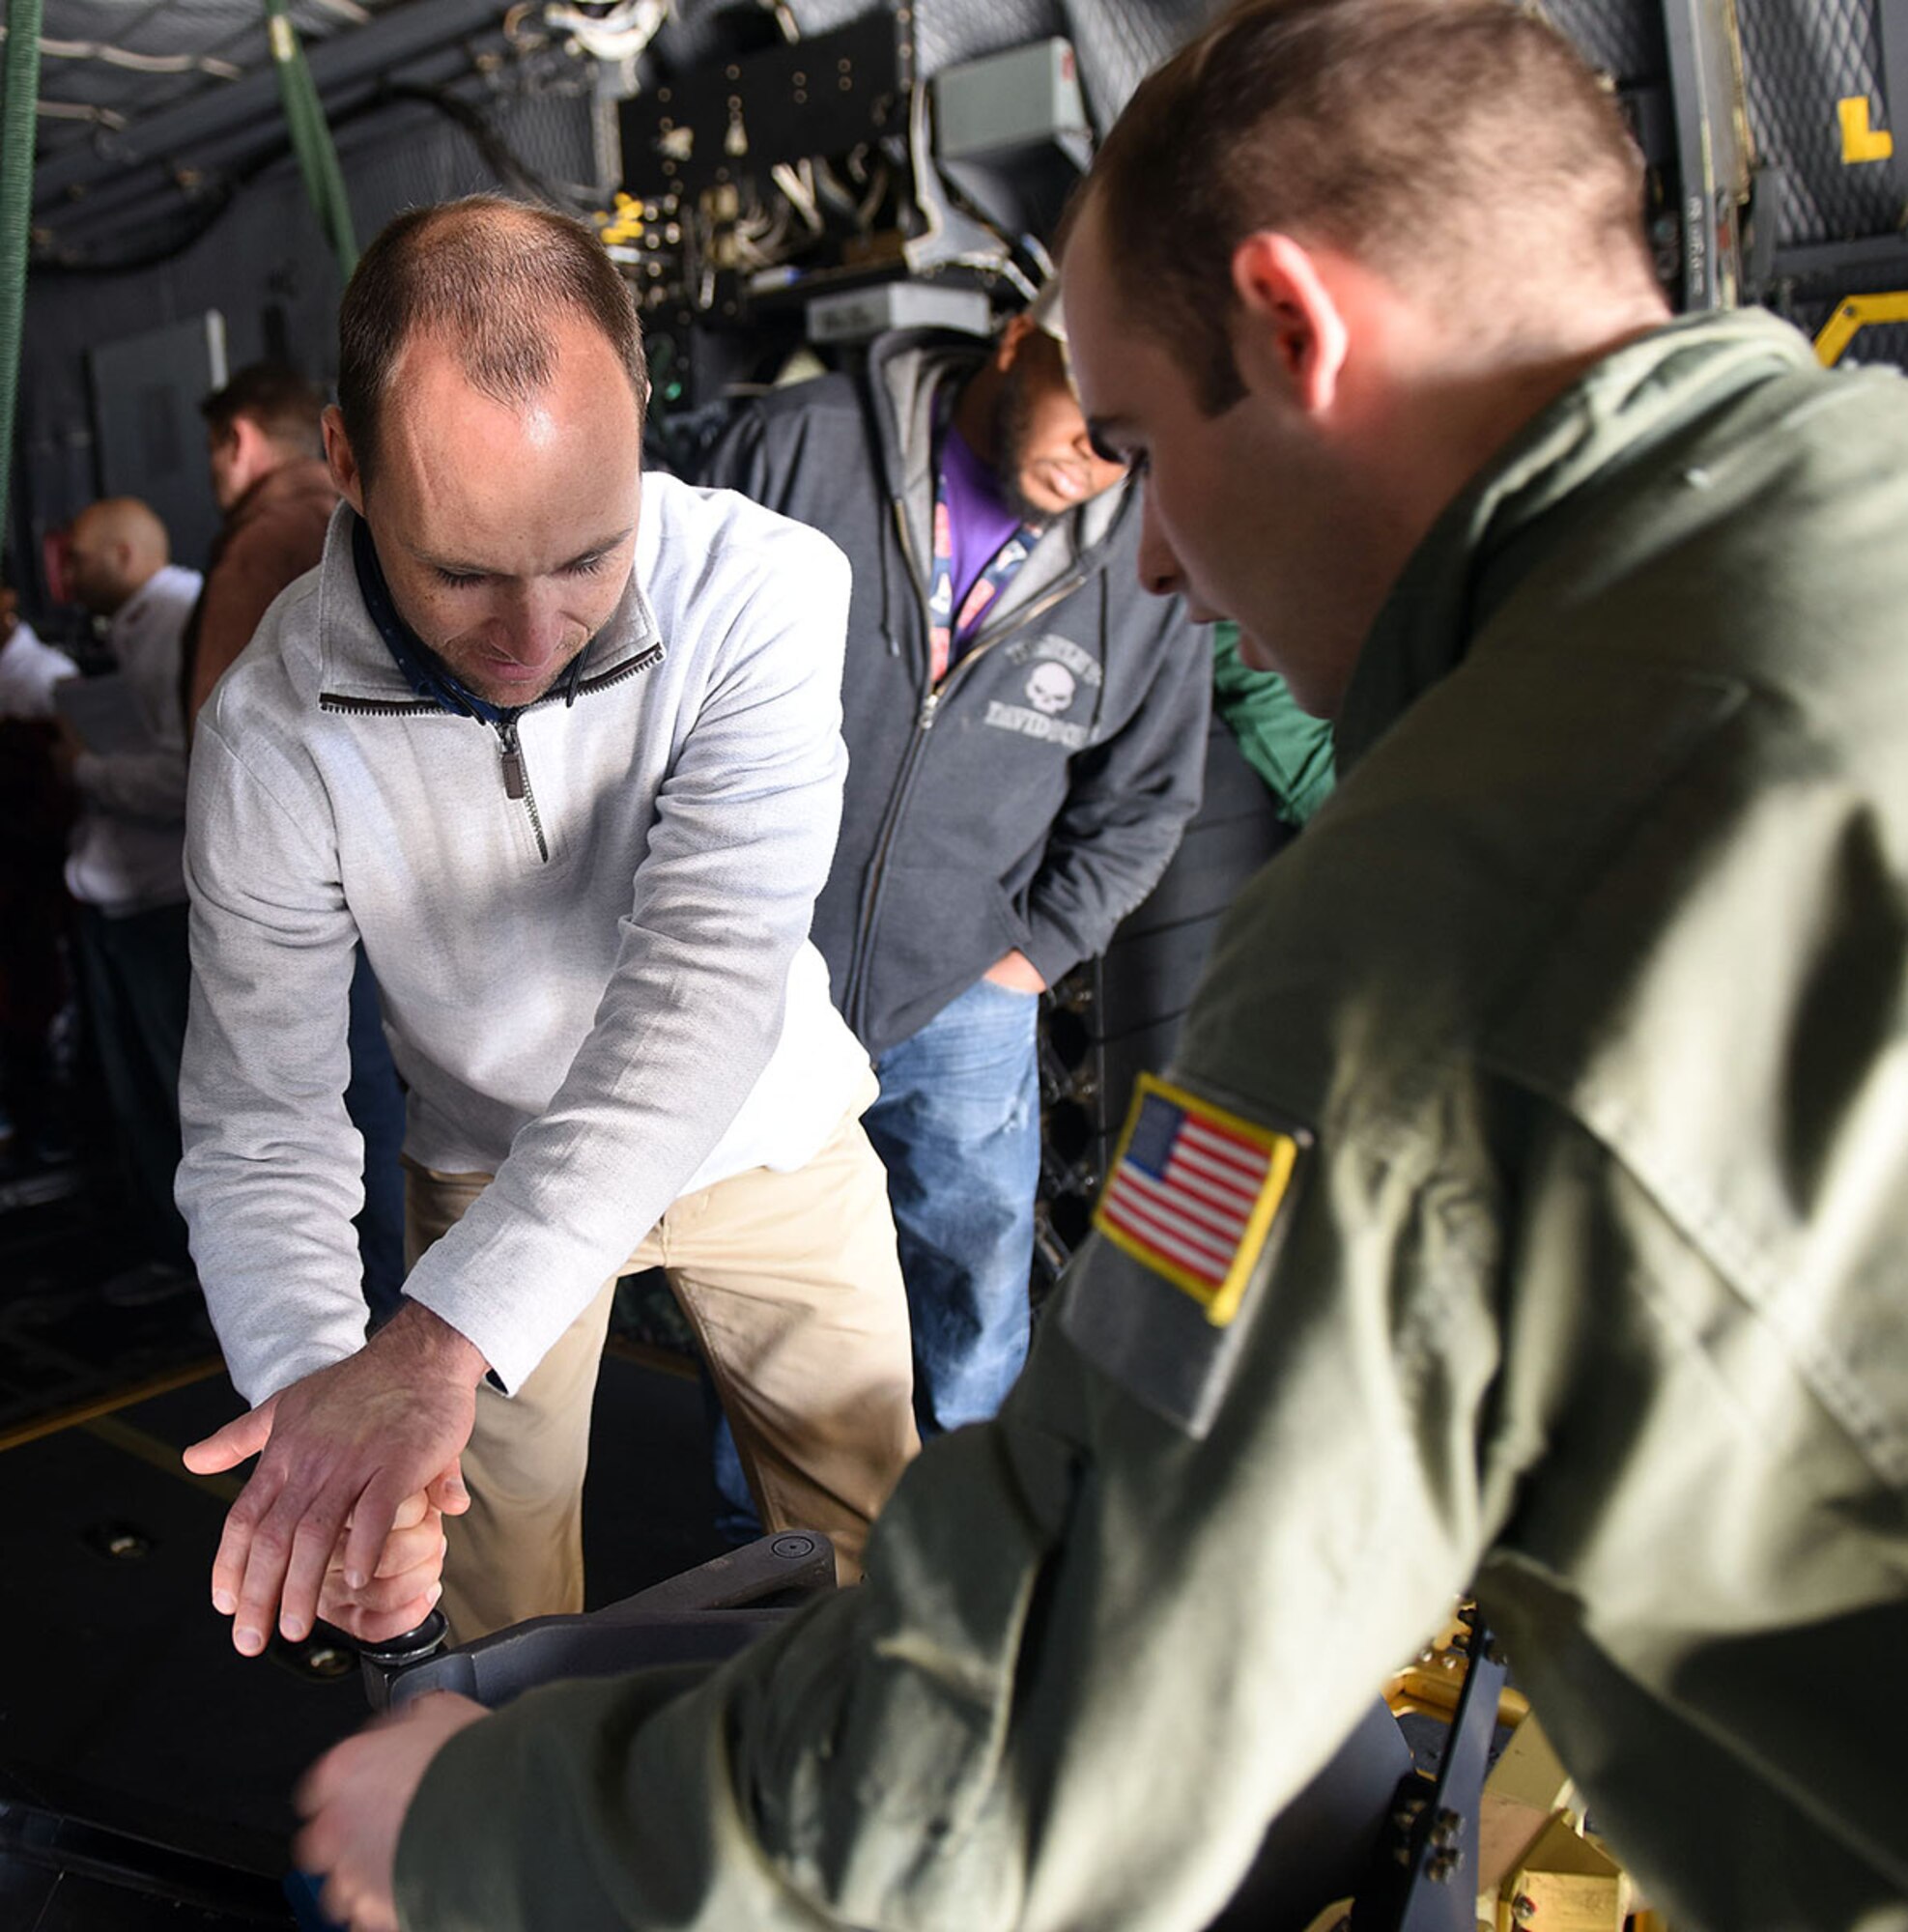 Todd Sanders, 568th Electronics Maintenance Group industrial engineering technician, left, receives a lesson from Staff Sgt. Mason Wise, Air Force Special  Operations aerial gunner, on how the weapons on an AC-130 Whiskey Gunship are operated. (U.S. Air Force photo by Tommie Horton)
